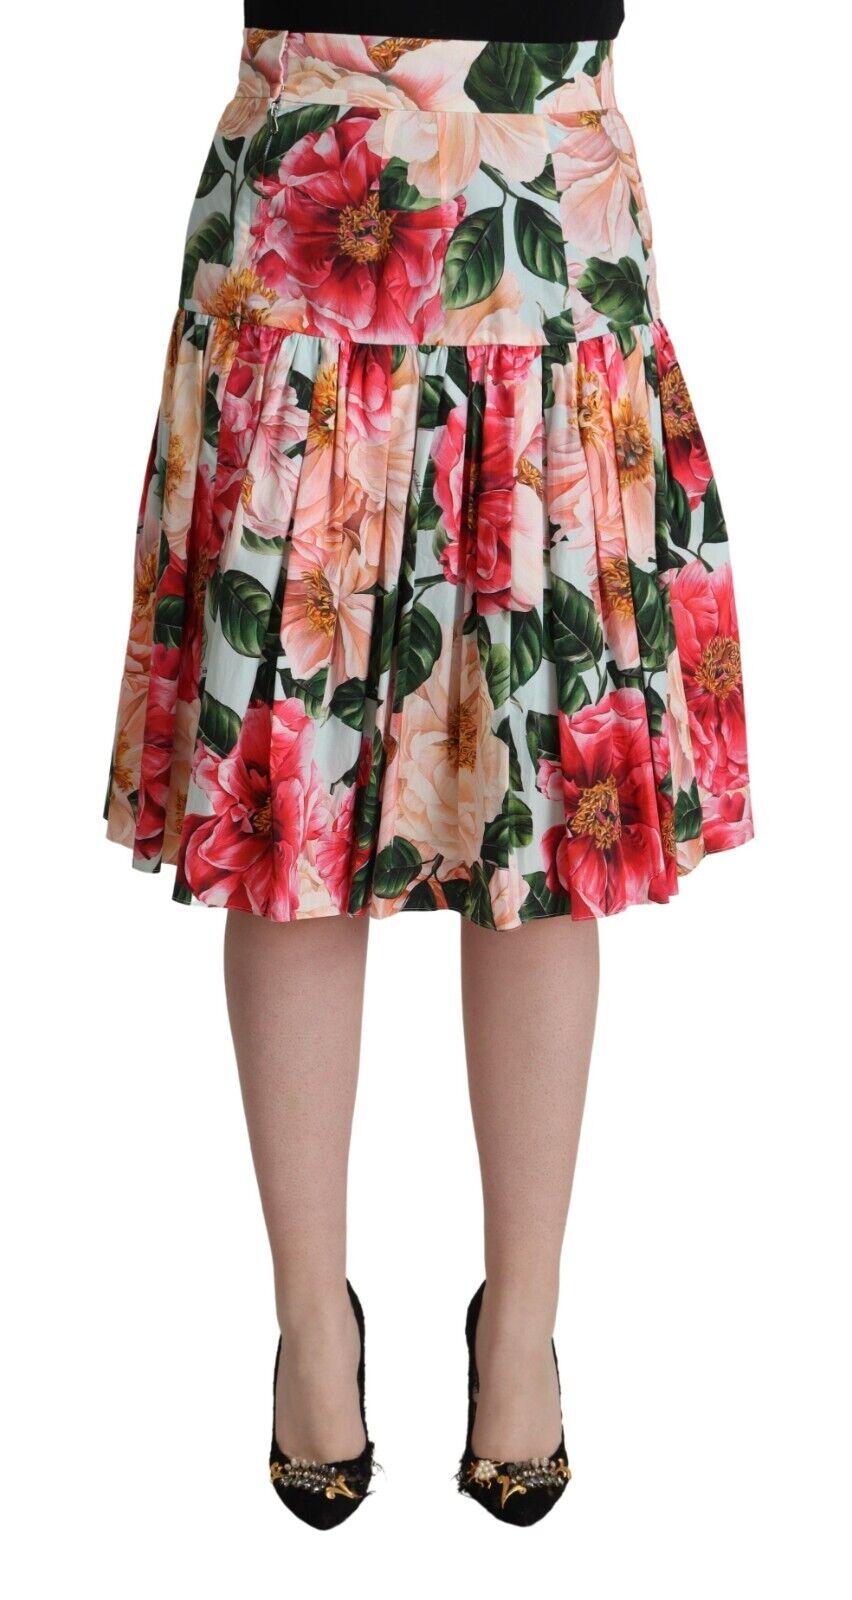 Dolce & Gabbana



Gorgeous brand new with tags, 100% Authentic Dolce & Gabbana floral printed pleated a-line skirt.



Model: Knee length, high waist

Color: Multicolor
Zipper and button closure

Logo details

Made in Italy

Material: 100%